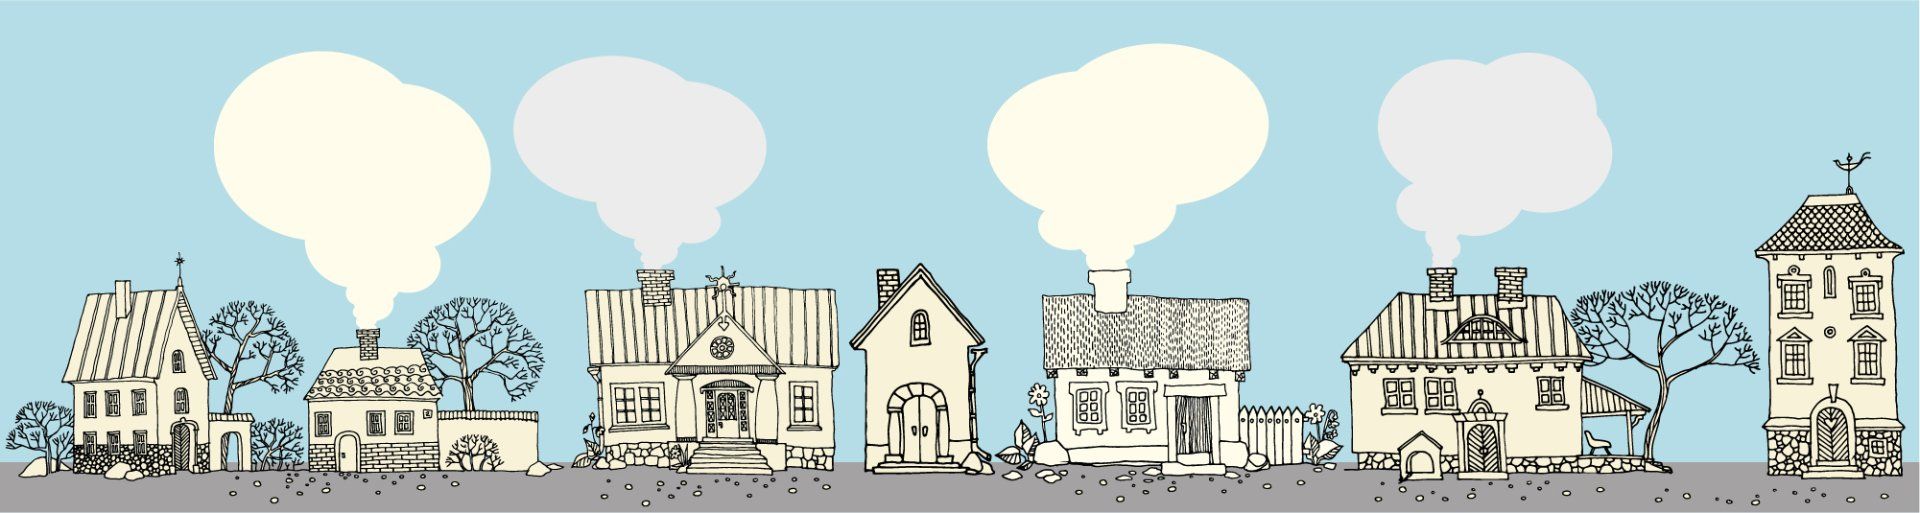 graphic image of houses with steam rising from the chimneys